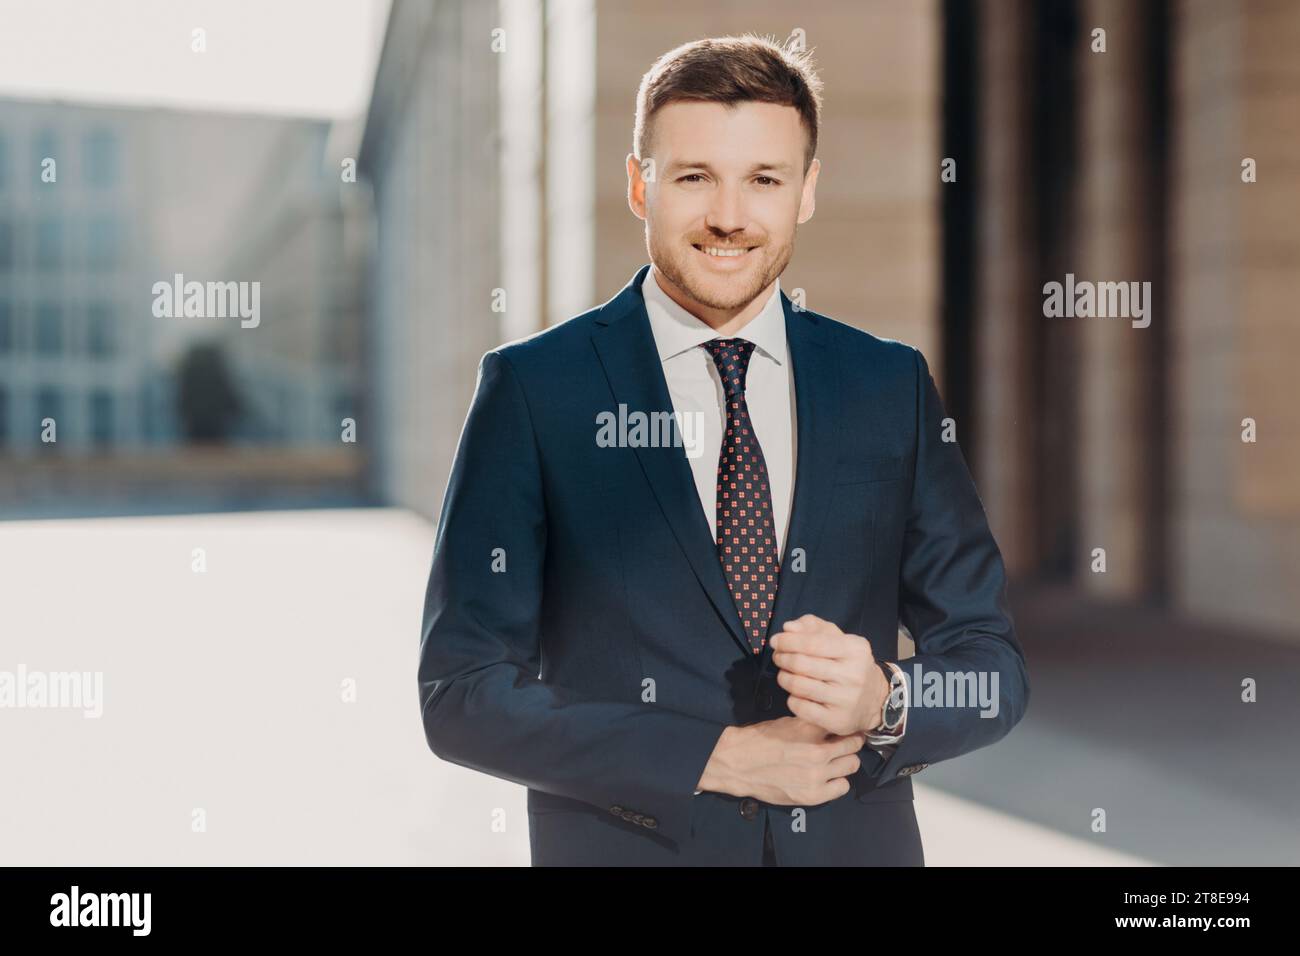 Self-assured businessman buttoning his suit jacket outdoors with a modern building facade behind Stock Photo